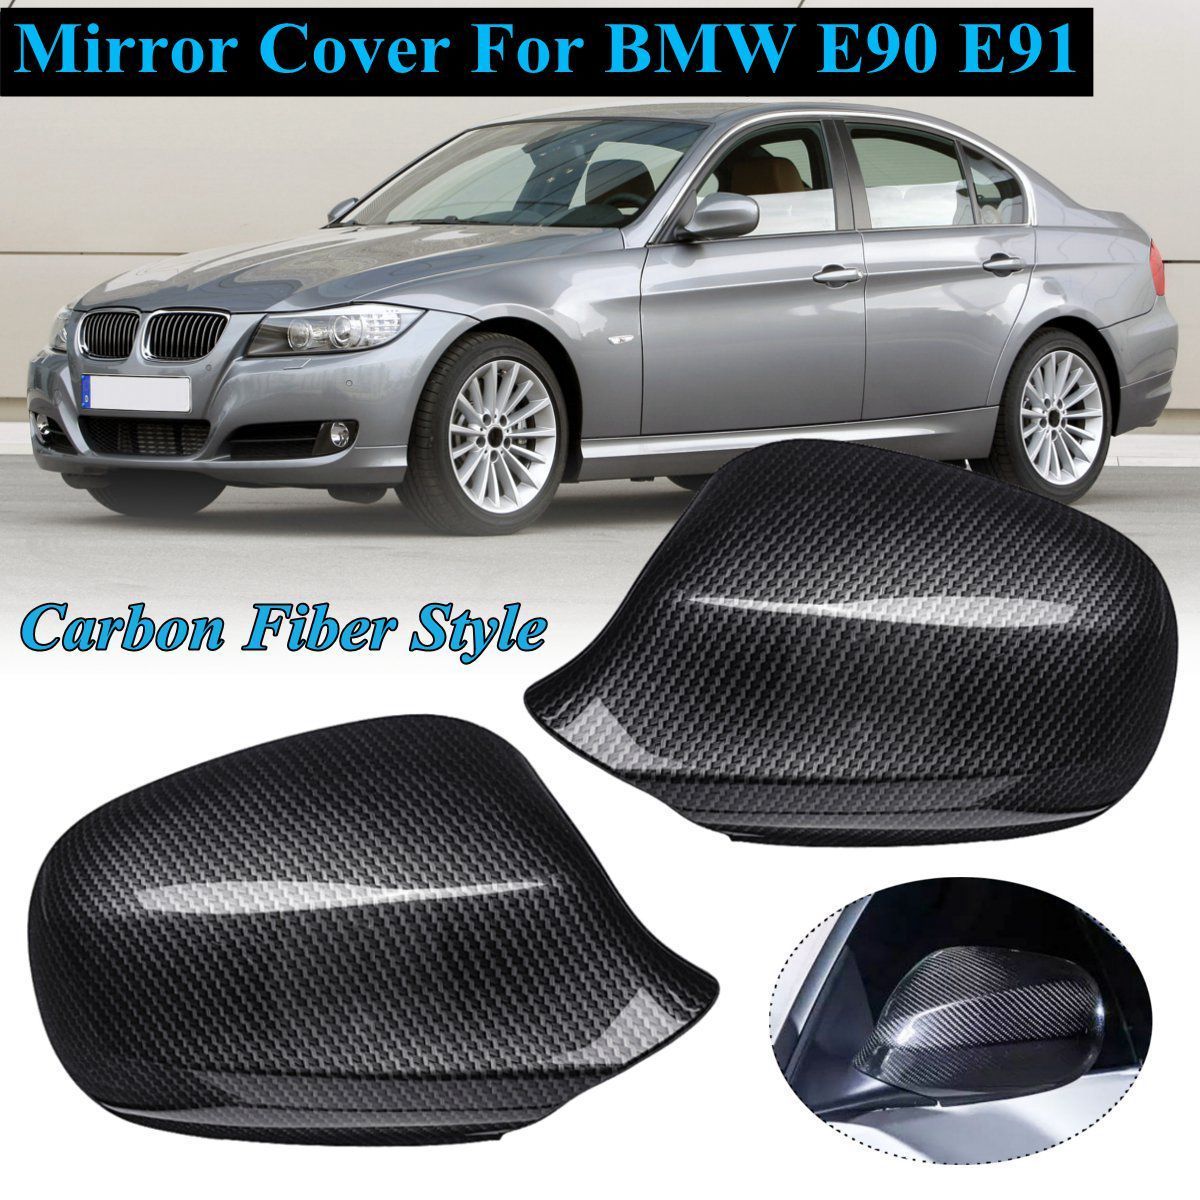 1-Pair-Left-and-Right-Carbon-Fiber-Style-Car-Rearview-Mirror-Cover-For-BMW-E90-E91-2009-2012-1378827